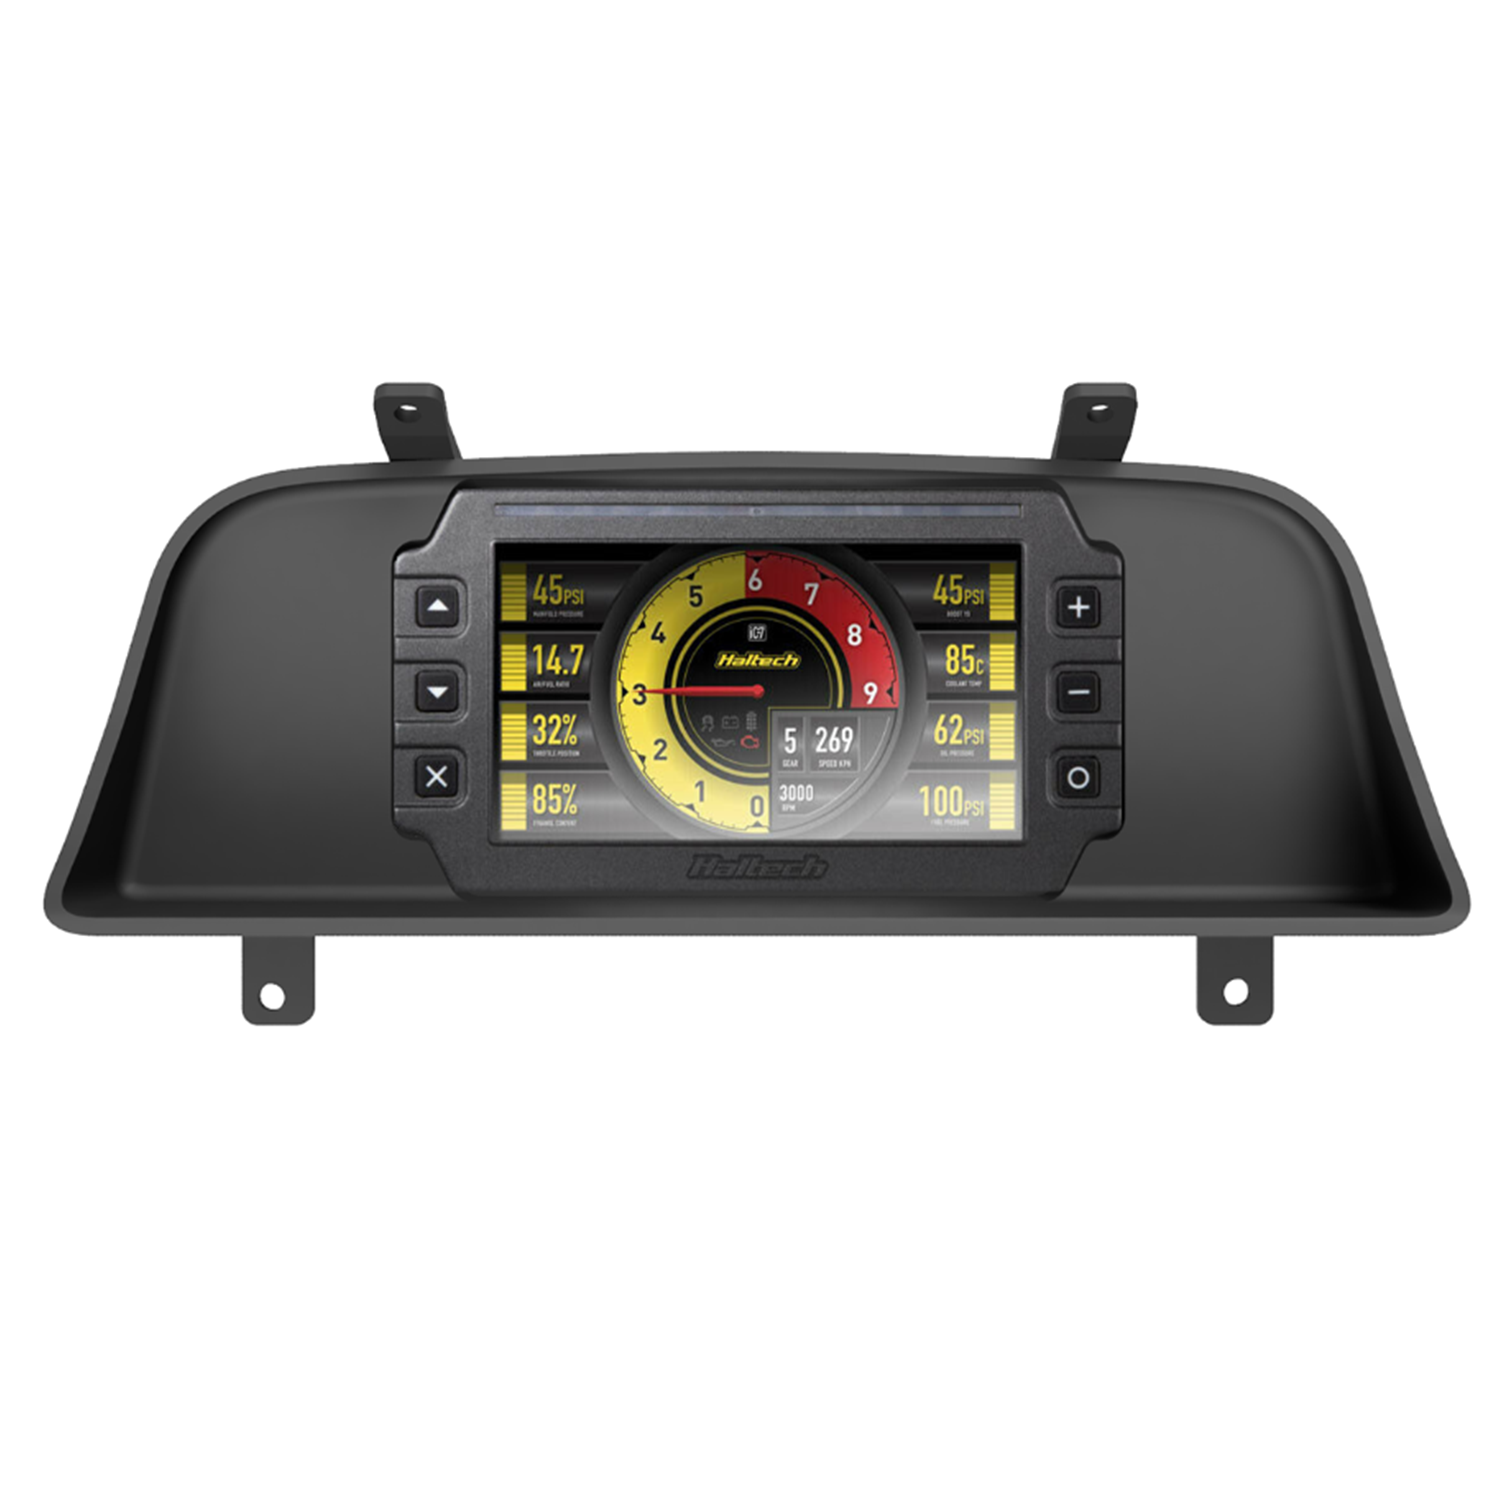 Toyota Land Cruiser 80 Series Recessed Dash Mount for the Haltech iC-7 (display not included)